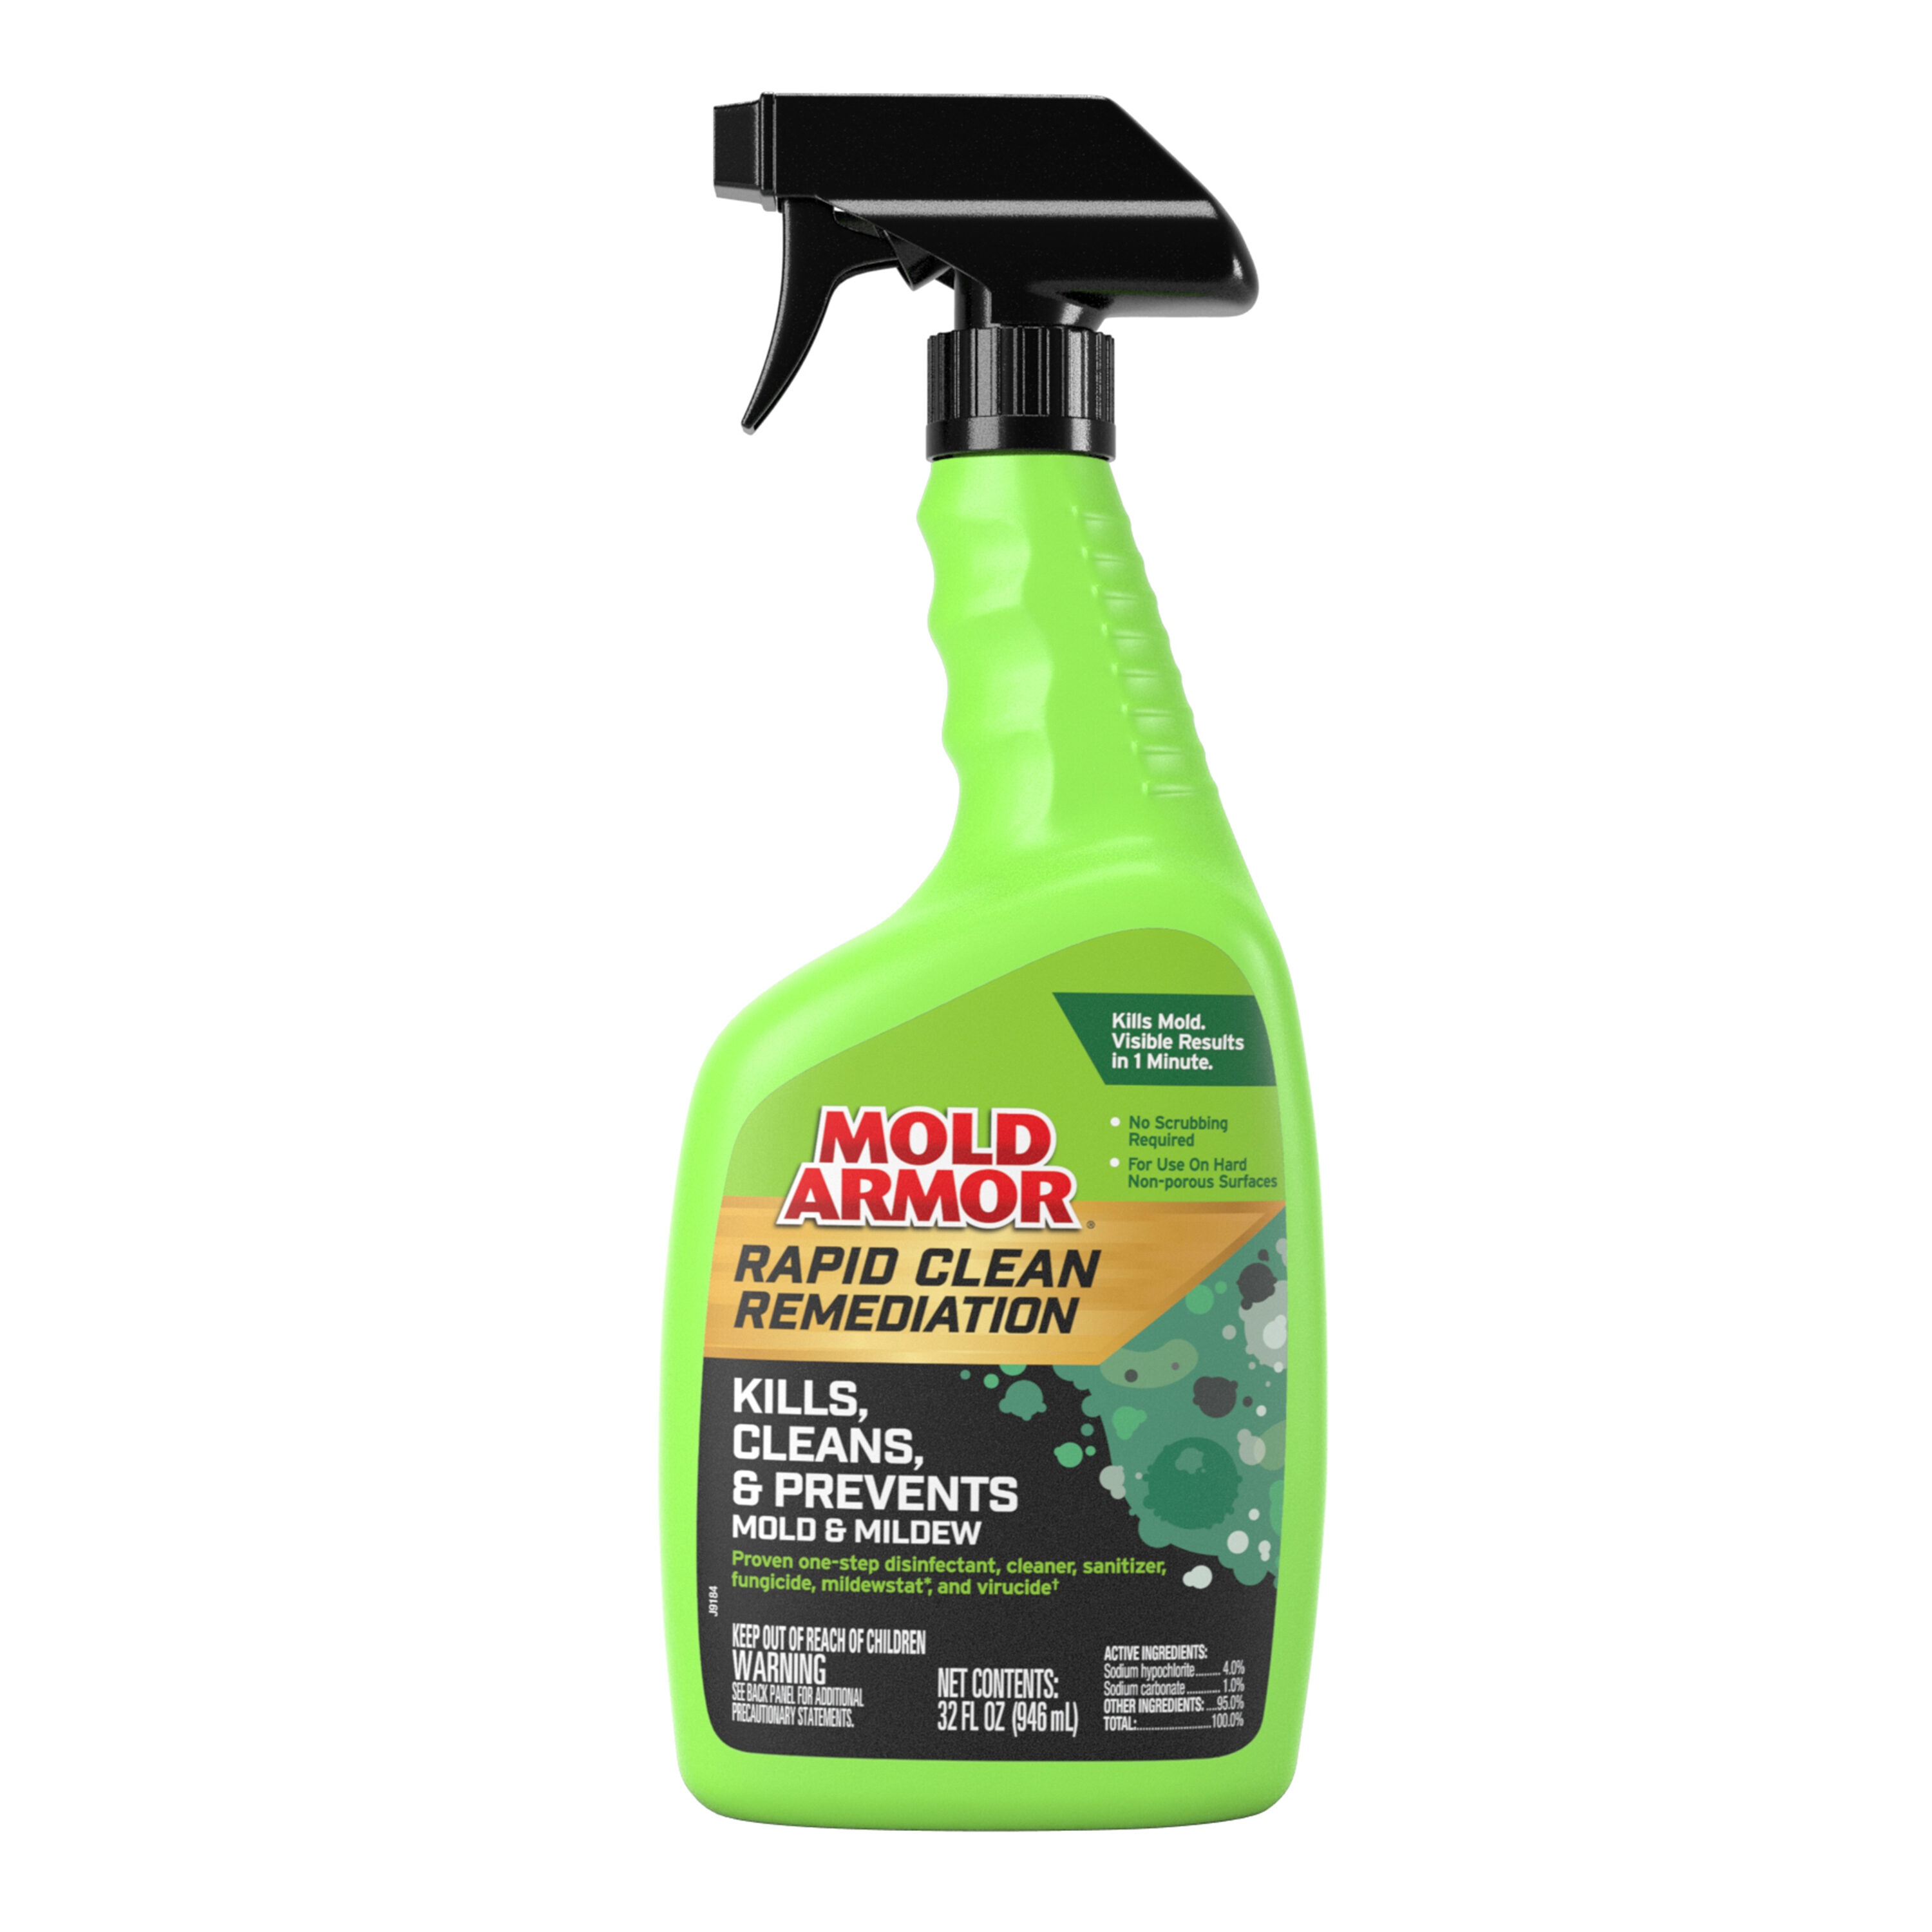 RAPID REMOVER 32 OZ BOTTLE WITH SPRAYER , IN STOCK AND READY TO SHIP!